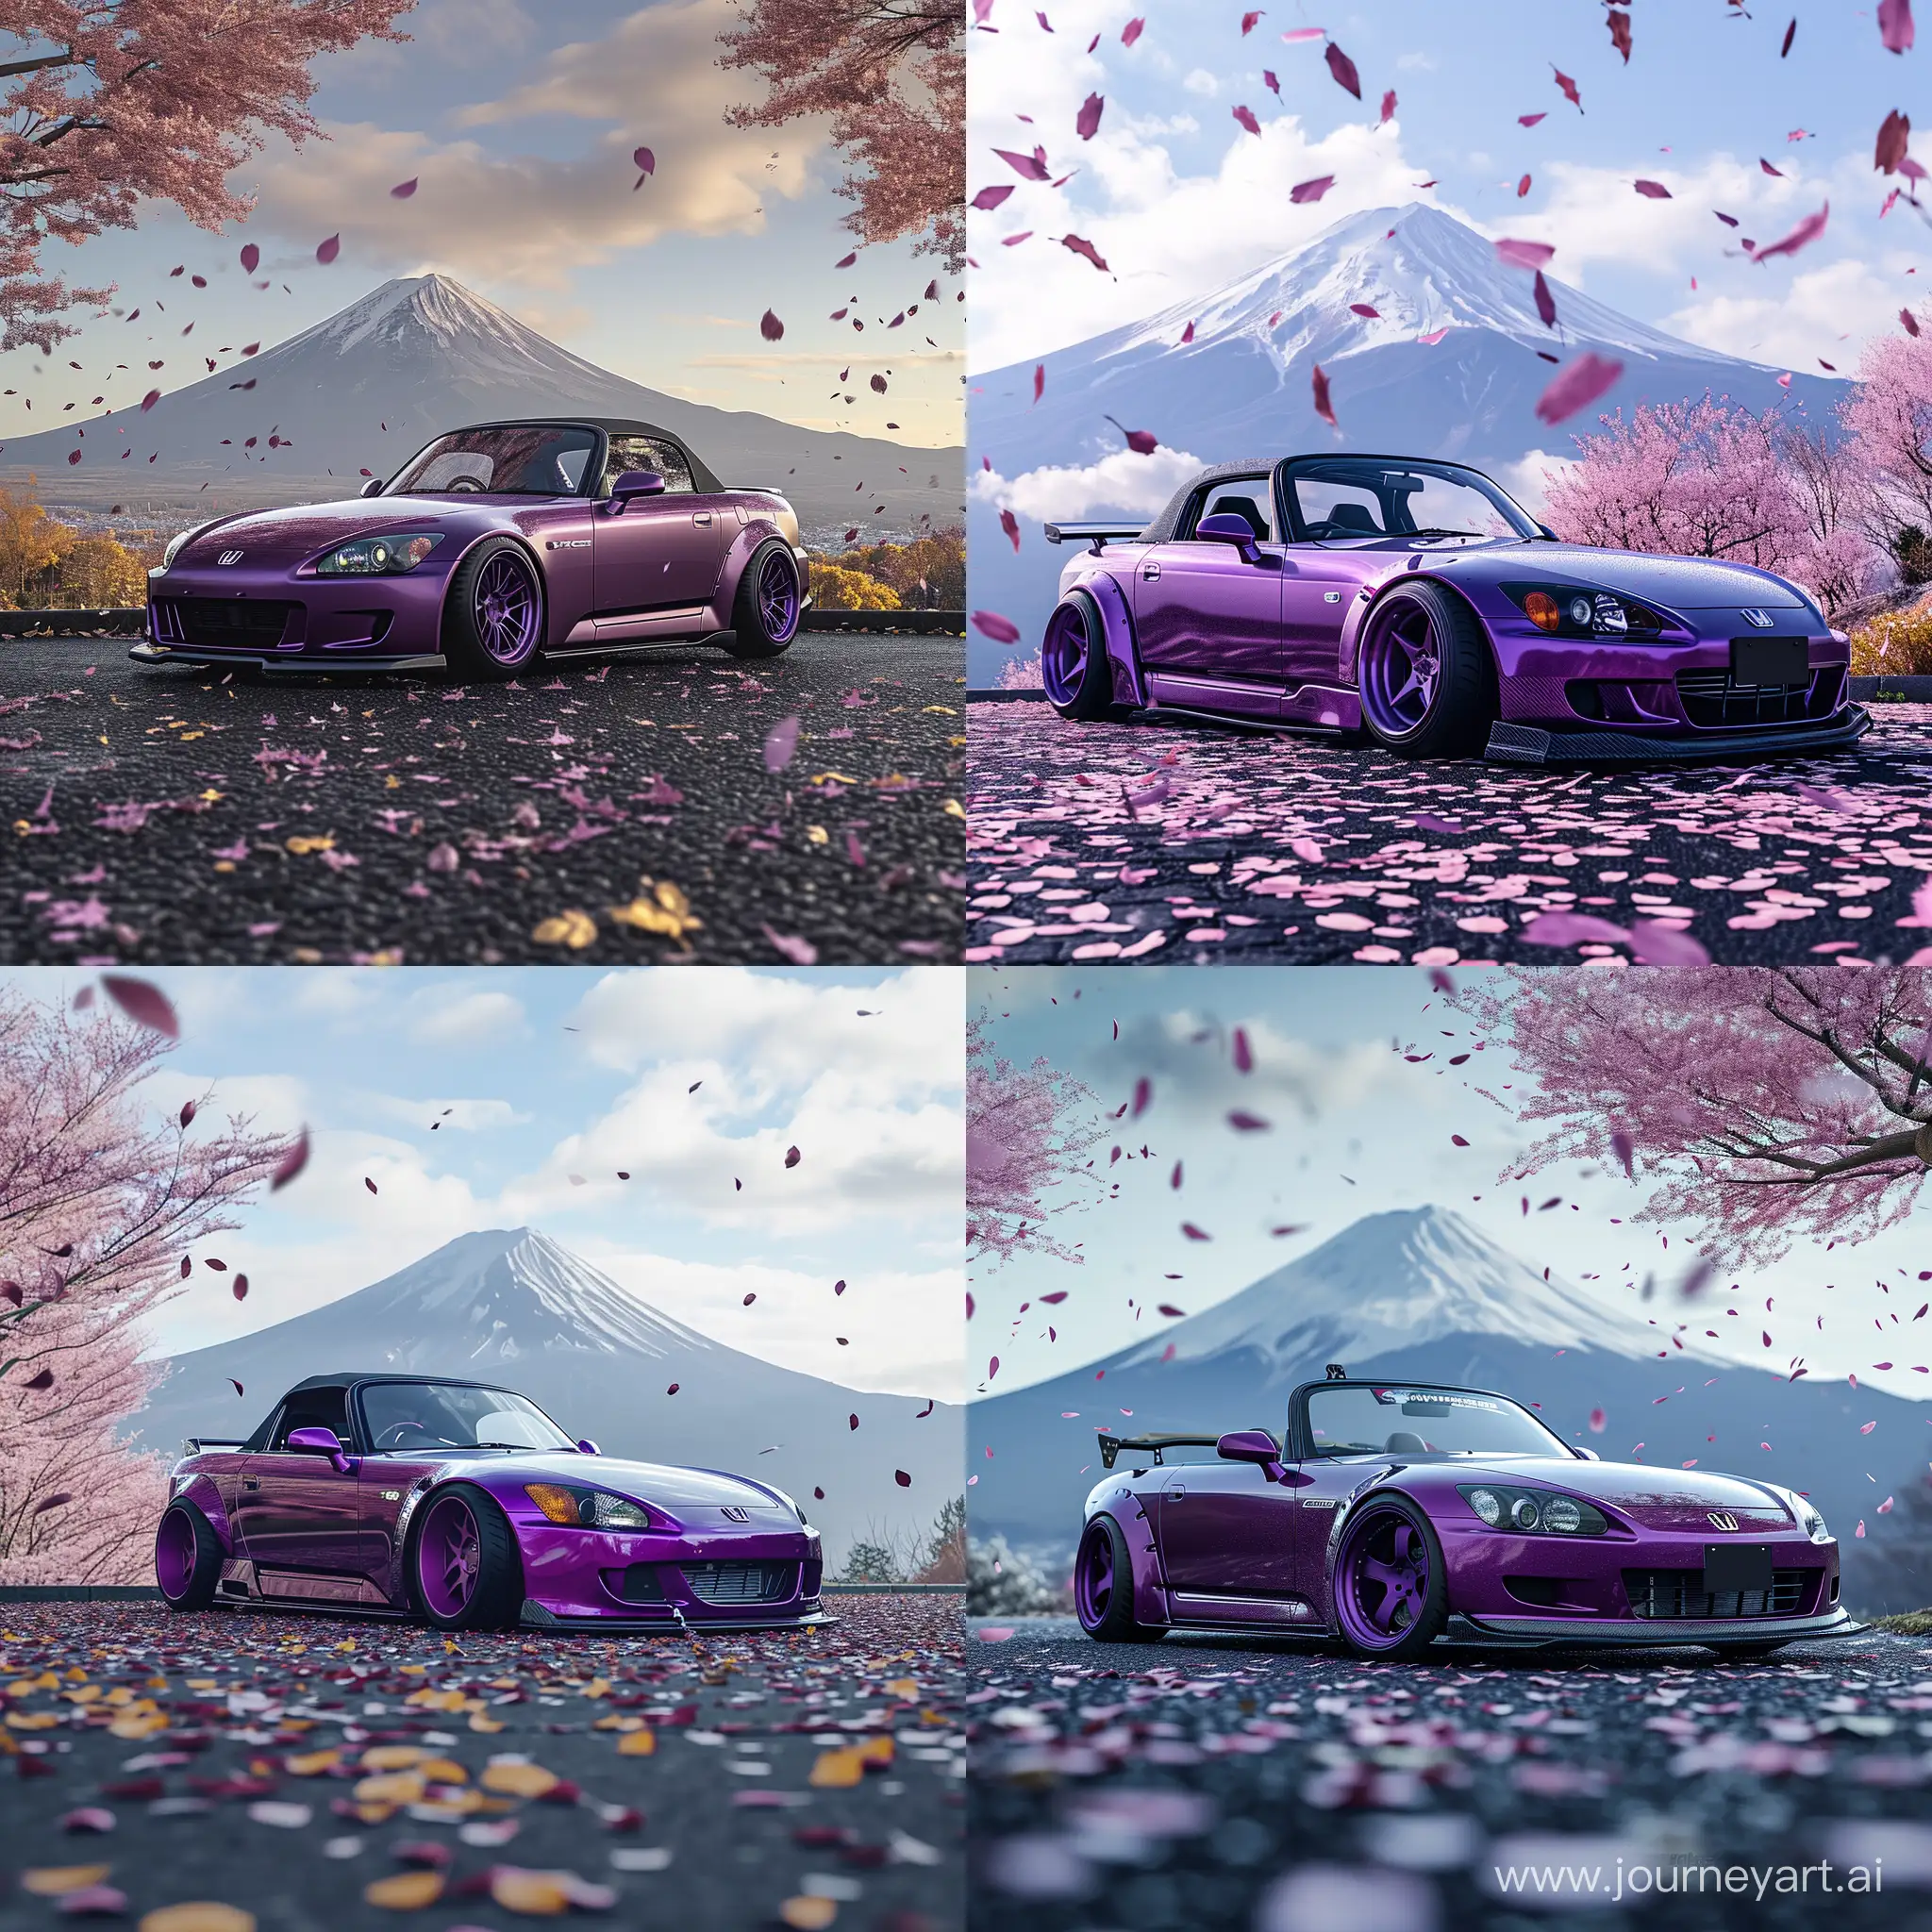 Hyperrealistic photo of a parked honda s2000 with drift kits in purple on the background of Mount Fuji with falling sakura leaves in winter